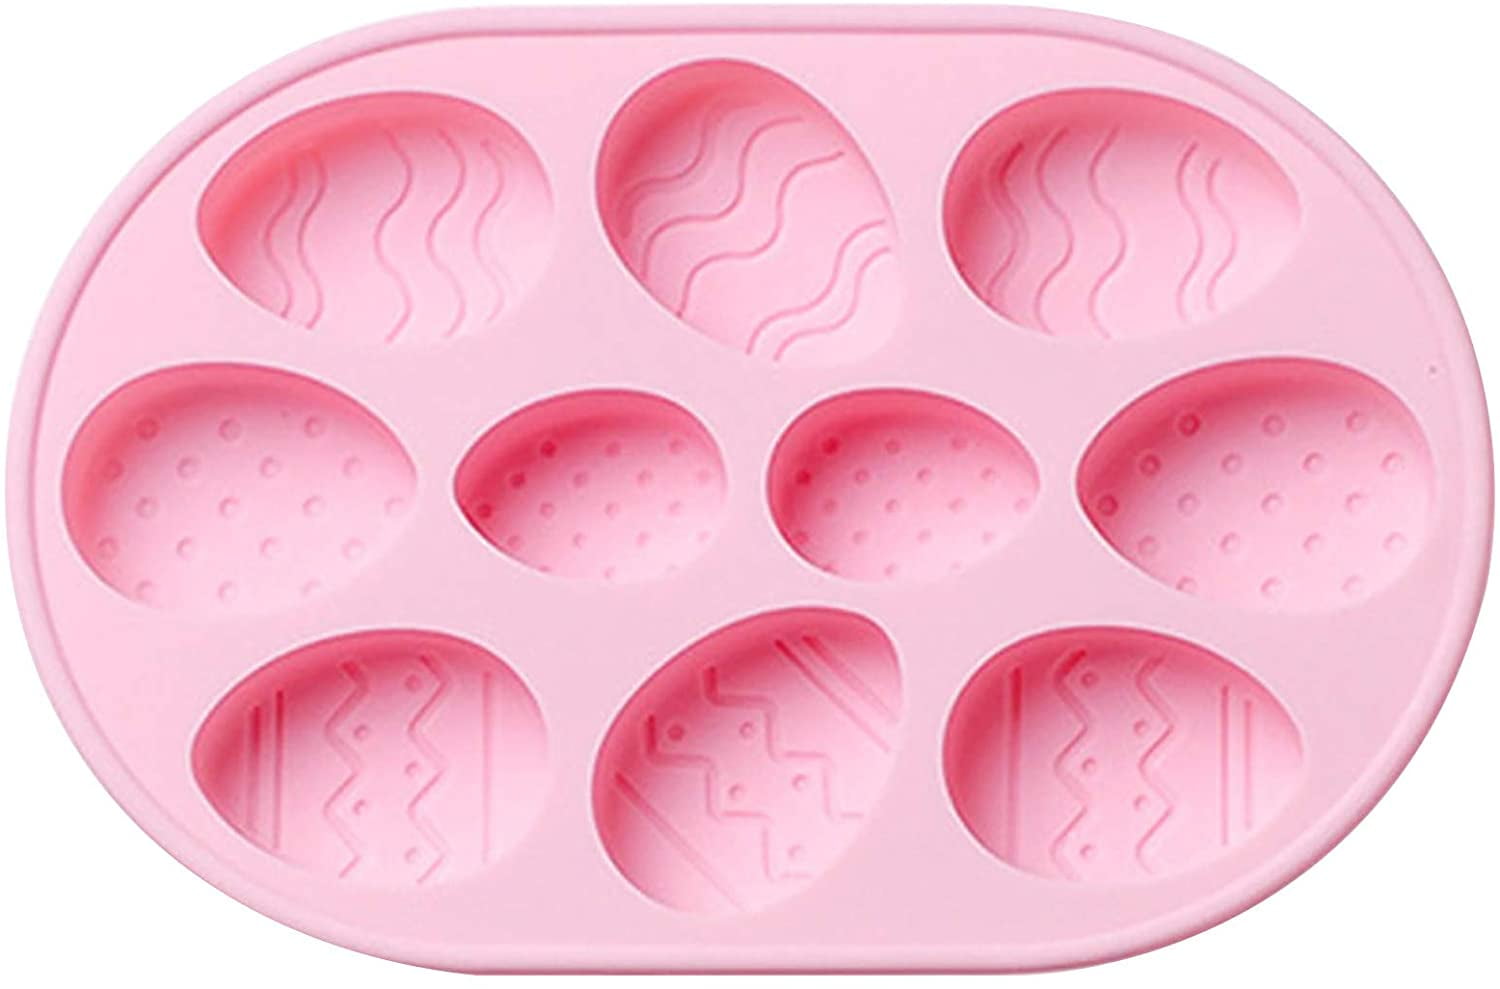 12 Holes Chocolate Ice Cube Mould Muffin Donut Silicone Molds Oval Shape Trays 